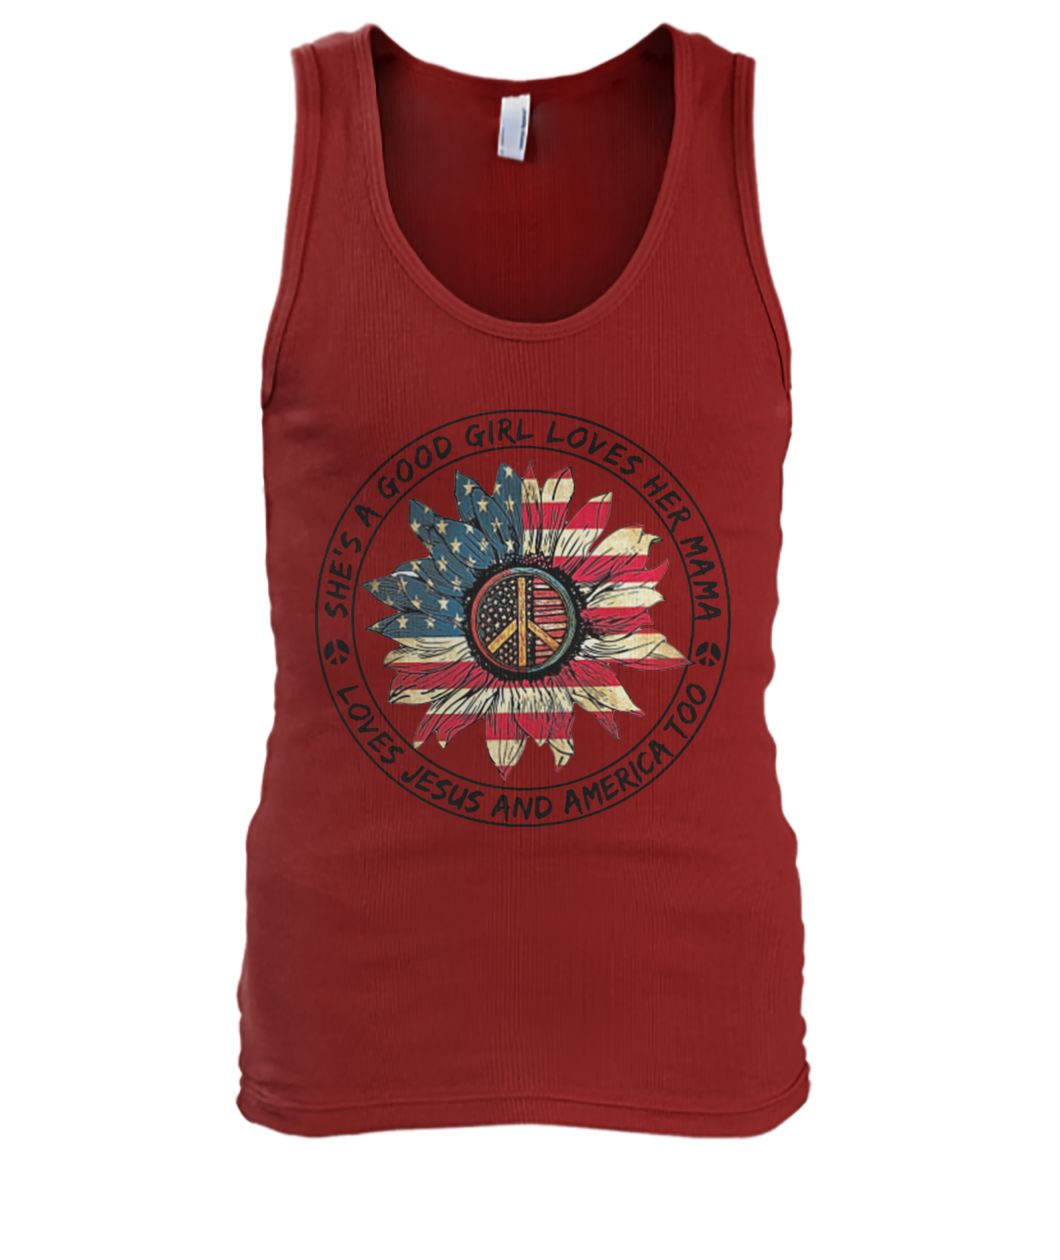 She's a good girl loves her mama loves jesus and america too hippie men's tank top